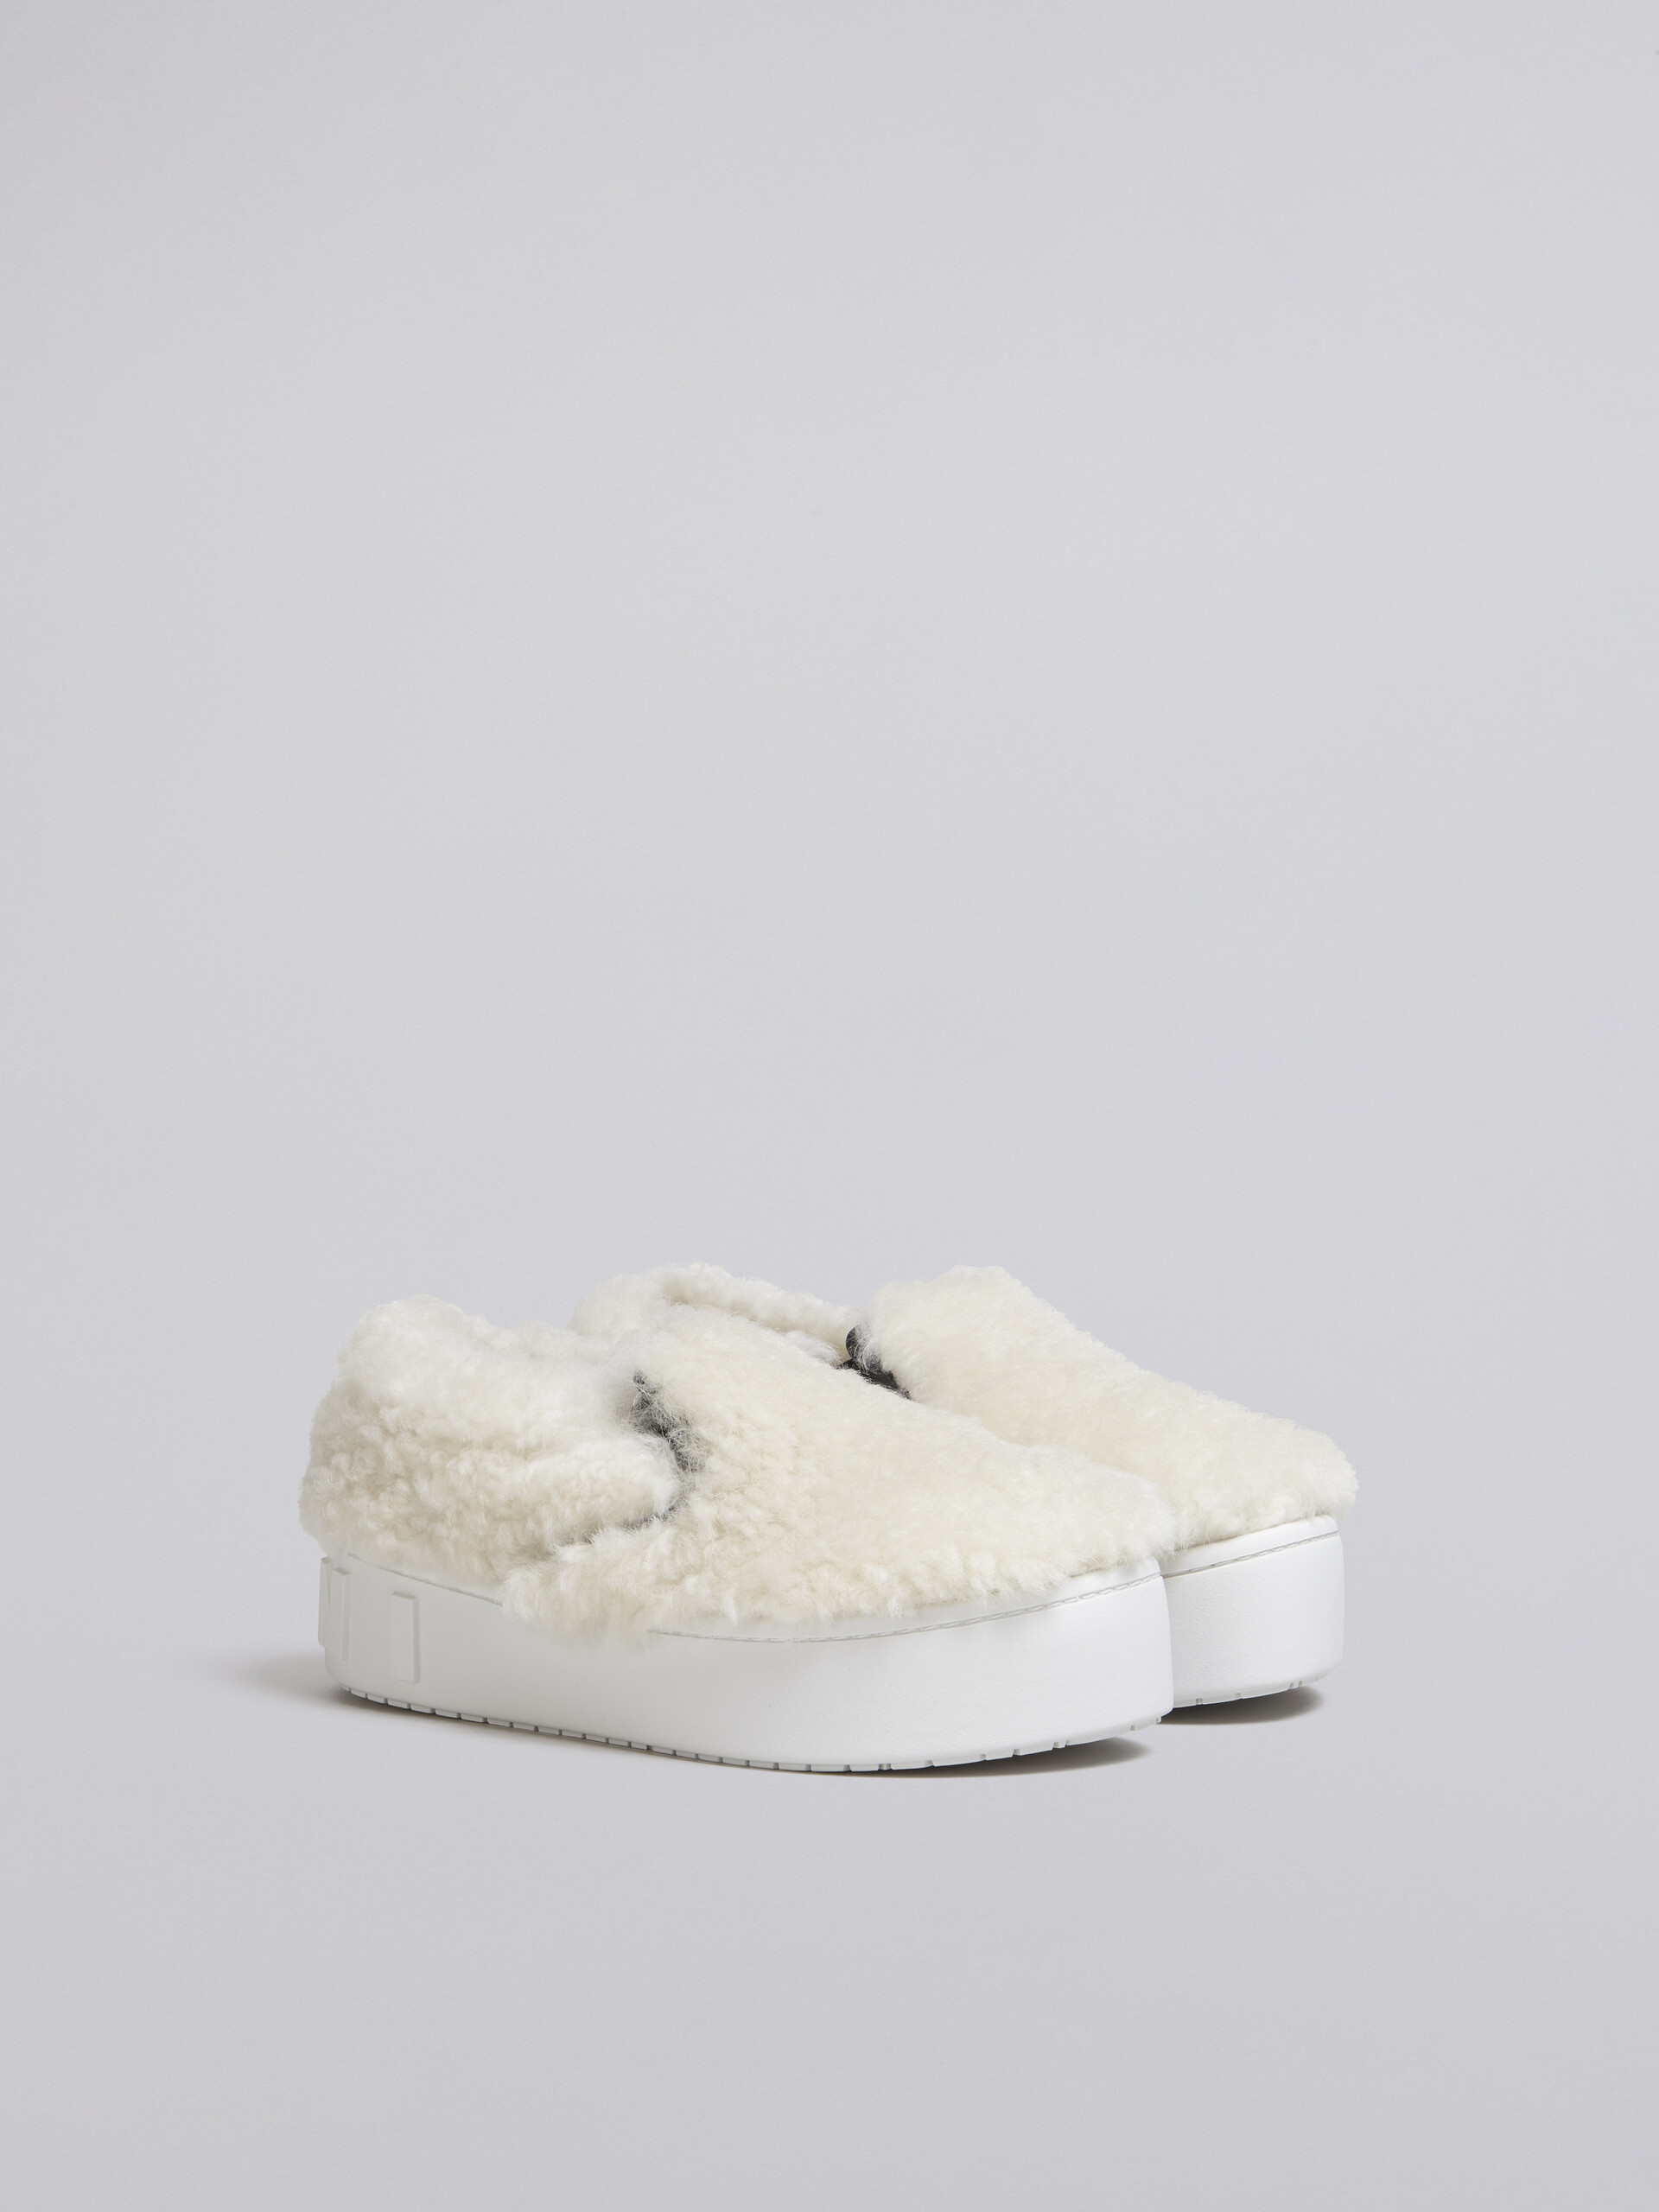 White shearling slip-on sneaker with maxi Marni logo - Sneakers - Image 2